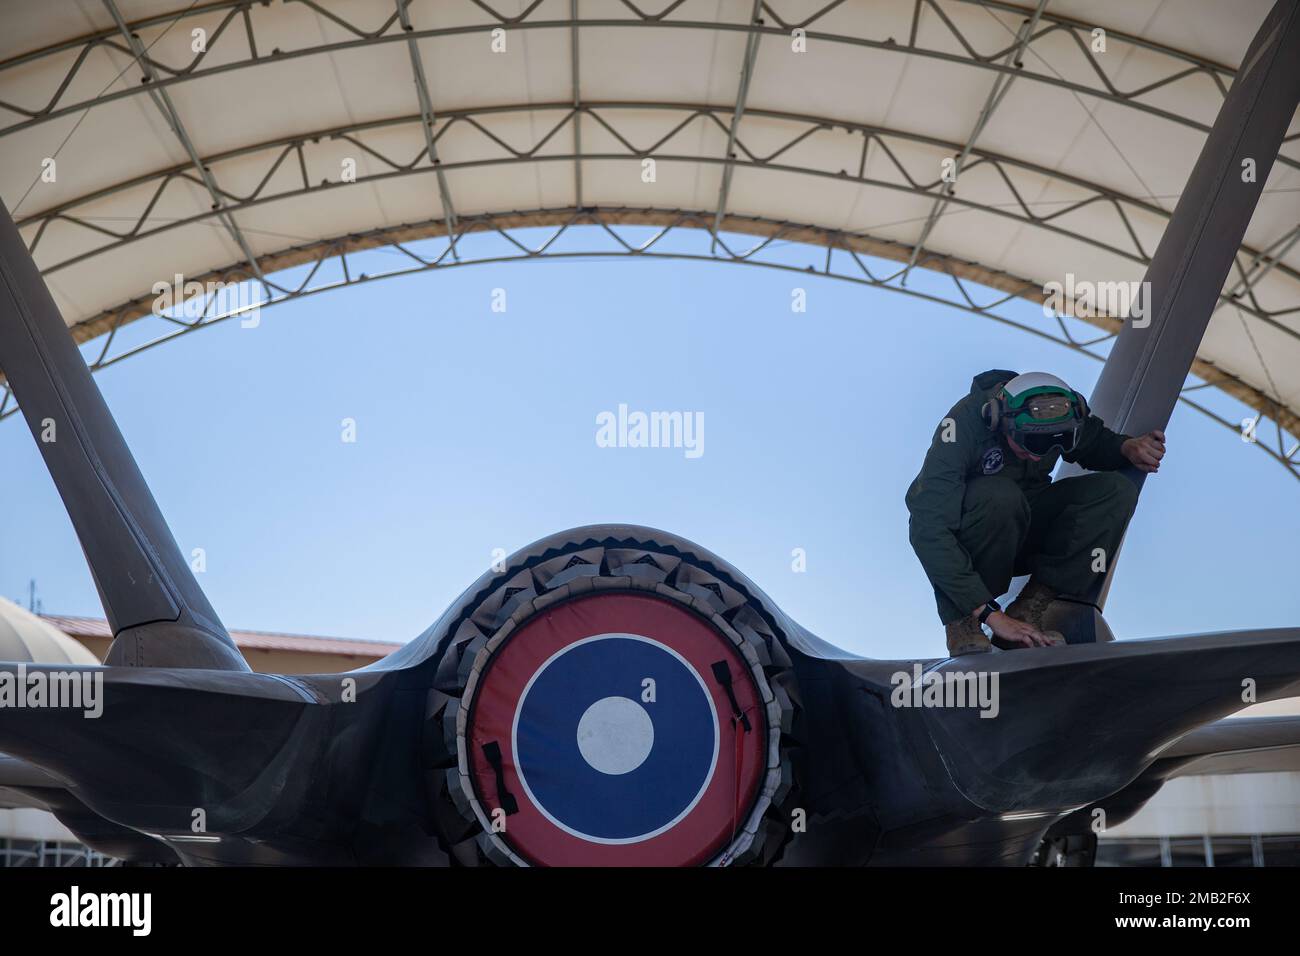 U.S. Marine Corps Lance Cpl. Logan Runnells, a fixed-wing aircraft mechanic with Marine Fighter Attack Squadron (VMFA) 122, 13th Marine Expeditionary Unit, inspects the tail of an F-35B Lightning II during Realistic Urban Training exercise at Marine Corps Air Station Yuma, Arizona, June 9, 2022. The purpose of RUT is to enhance the integration and collective capability of the MEU's command, air, ground, and logistics elements and prepare the 13th MEU to meet the nation's crisis response needs during its upcoming overseas deployment. Stock Photo